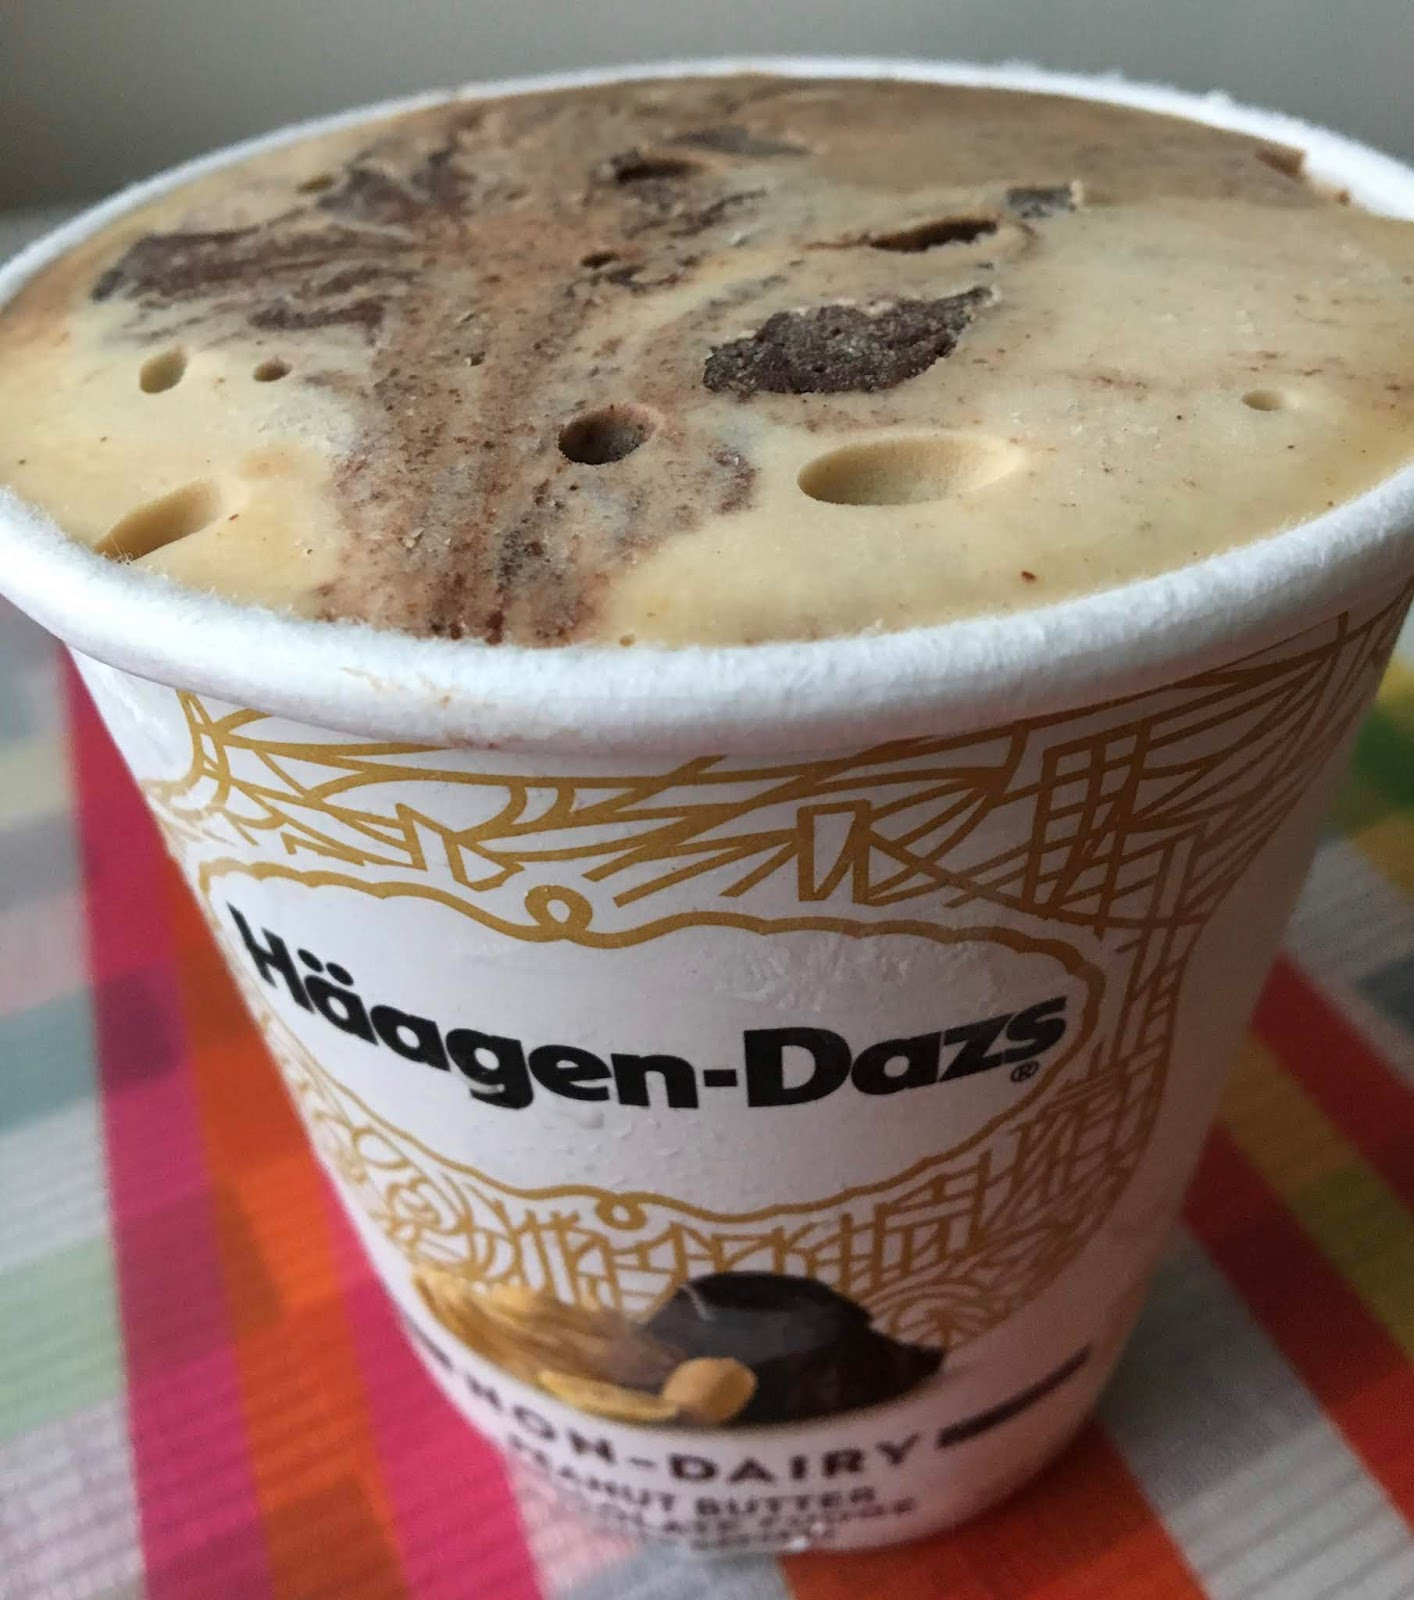 Desserts without Dairy Beautiful the Gluten &amp; Dairy Free Review Blog Häagen Dazs Non Dairy